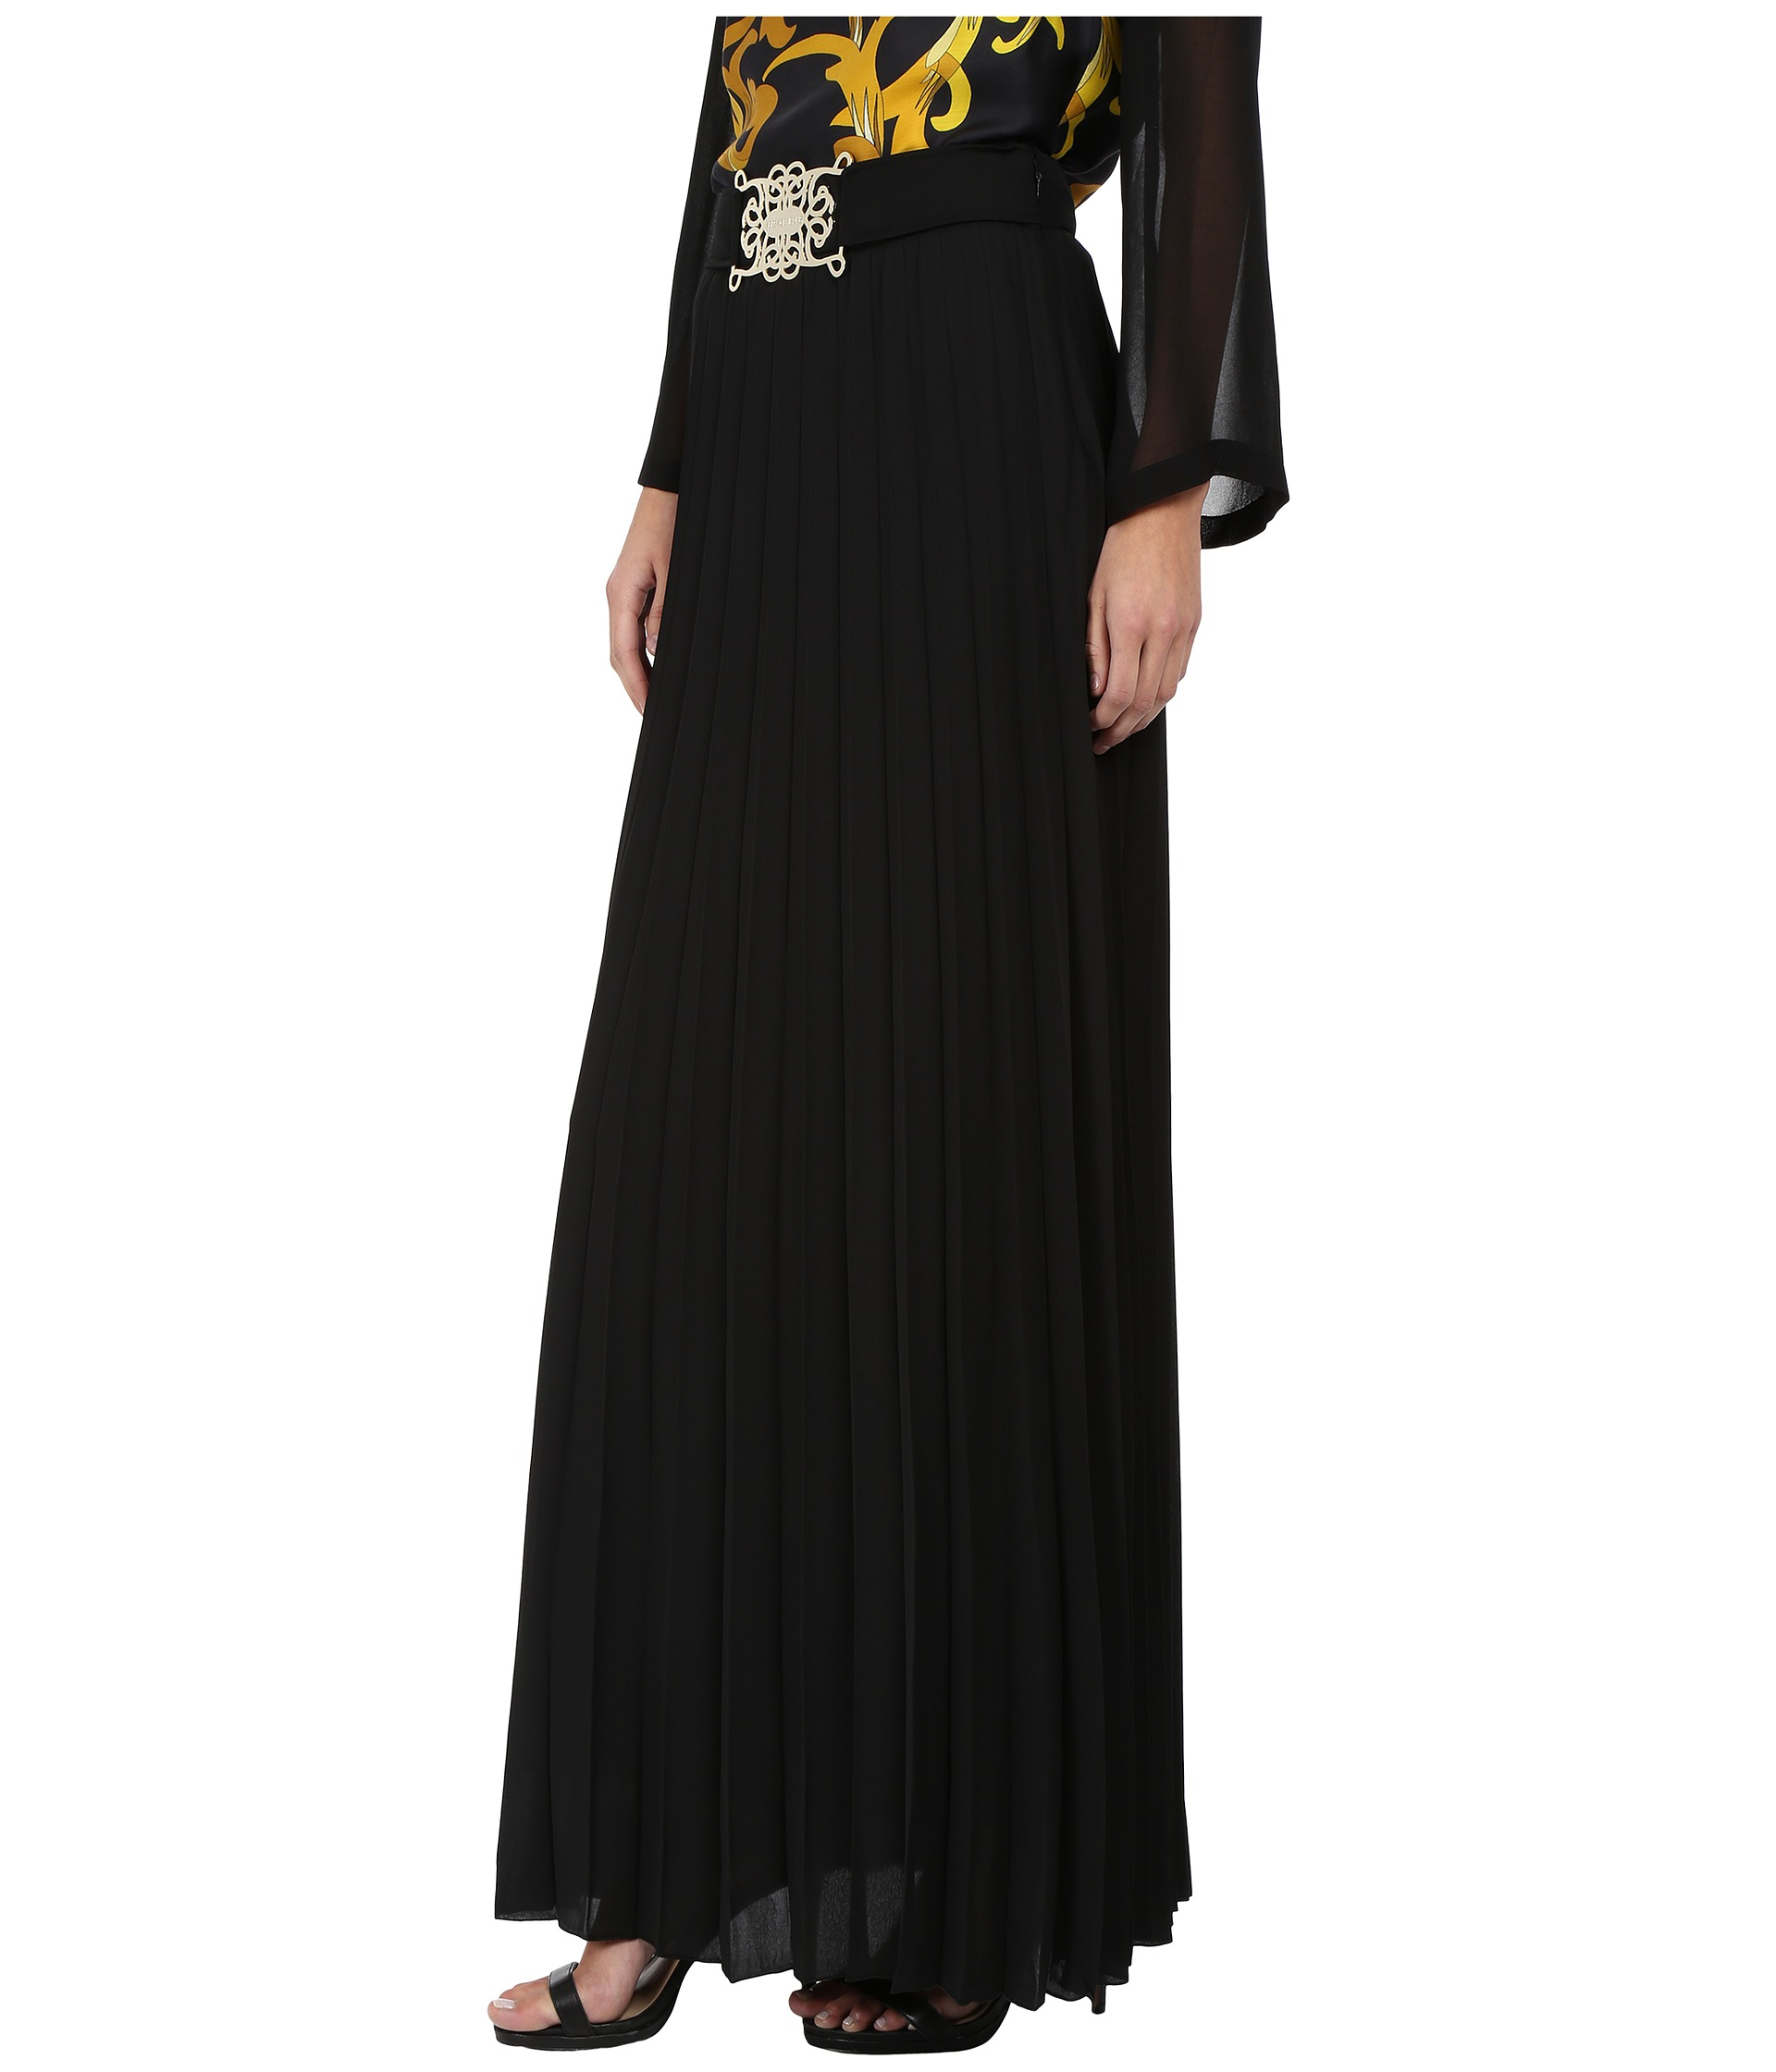 Lyst - Versace Jeans Pleated Long Maxi Skirt in Black